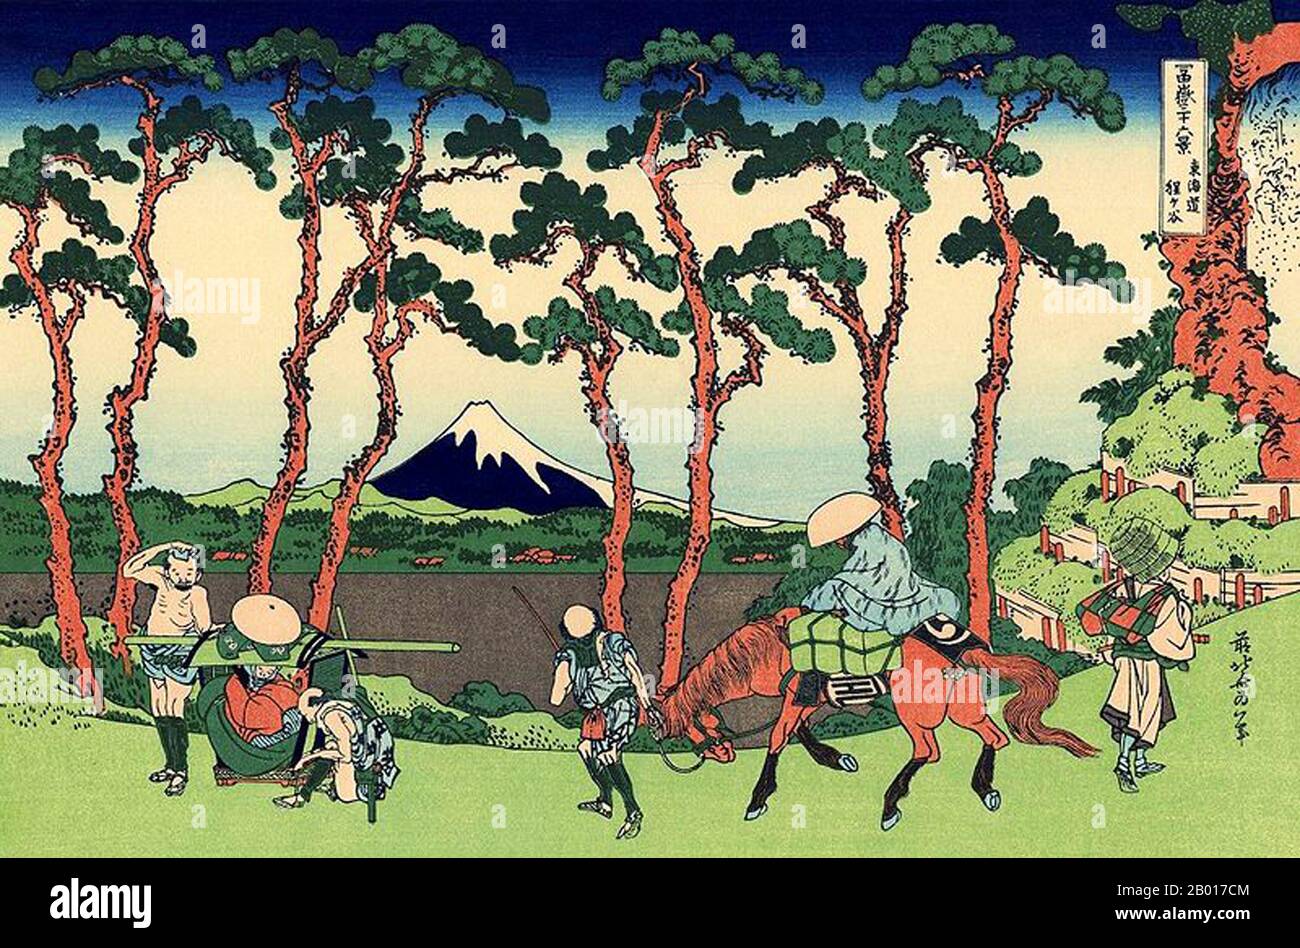 Japan: ‘Hodogaya on the Tokaido Road’. Ukiyo-e woodblock print from the series ‘Thirty-Six Views of Mount Fuji’ by Katsushika Hokusai (31 October 1760 - 10 May 1849), 1830.  ‘Thirty-six Views of Mount Fuji’ is an ‘ukiyo-e’ series of woodcut prints by Japanese artist Katsushika Hokusai. The series depicts Mount Fuji in differing seasons and weather conditions from a variety of places and distances. It actually consists of 46 prints created between 1826 and 1833. The first 36 were included in the original publication and, due to their popularity, 10 more were added after the original publication Stock Photo